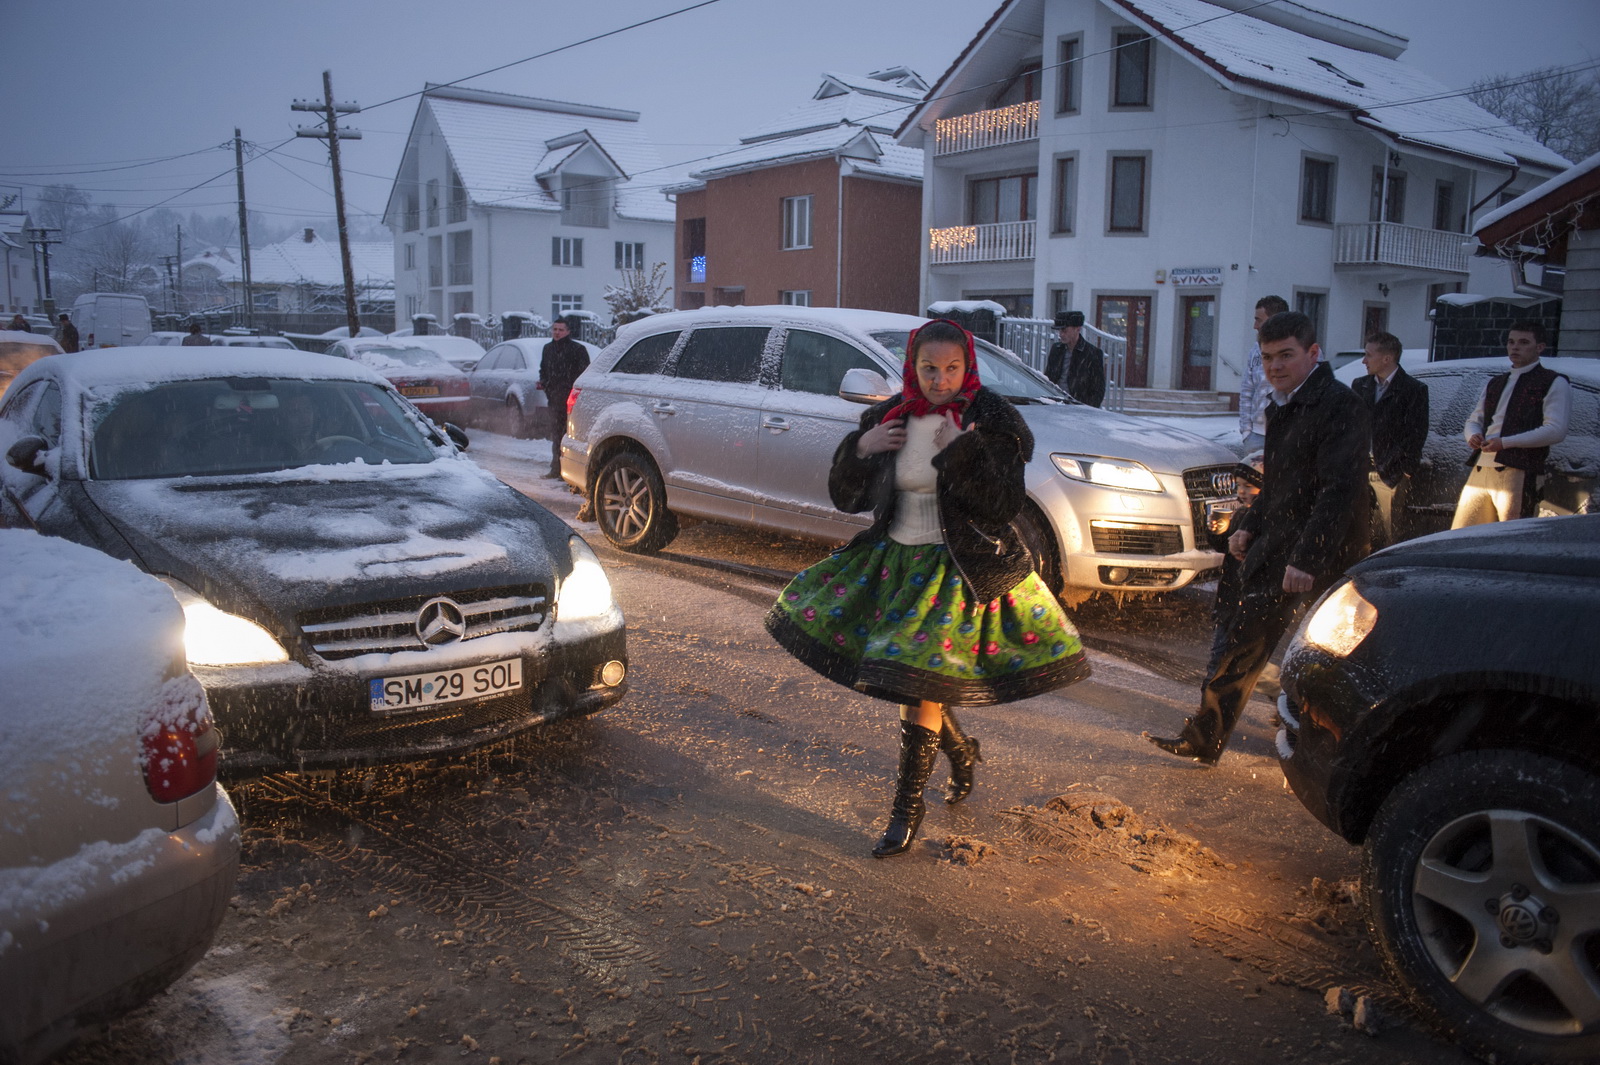 In all weathers: Villagers head to community centre in Tarsolt for a wedding (Photo © Petrut Calinescu)